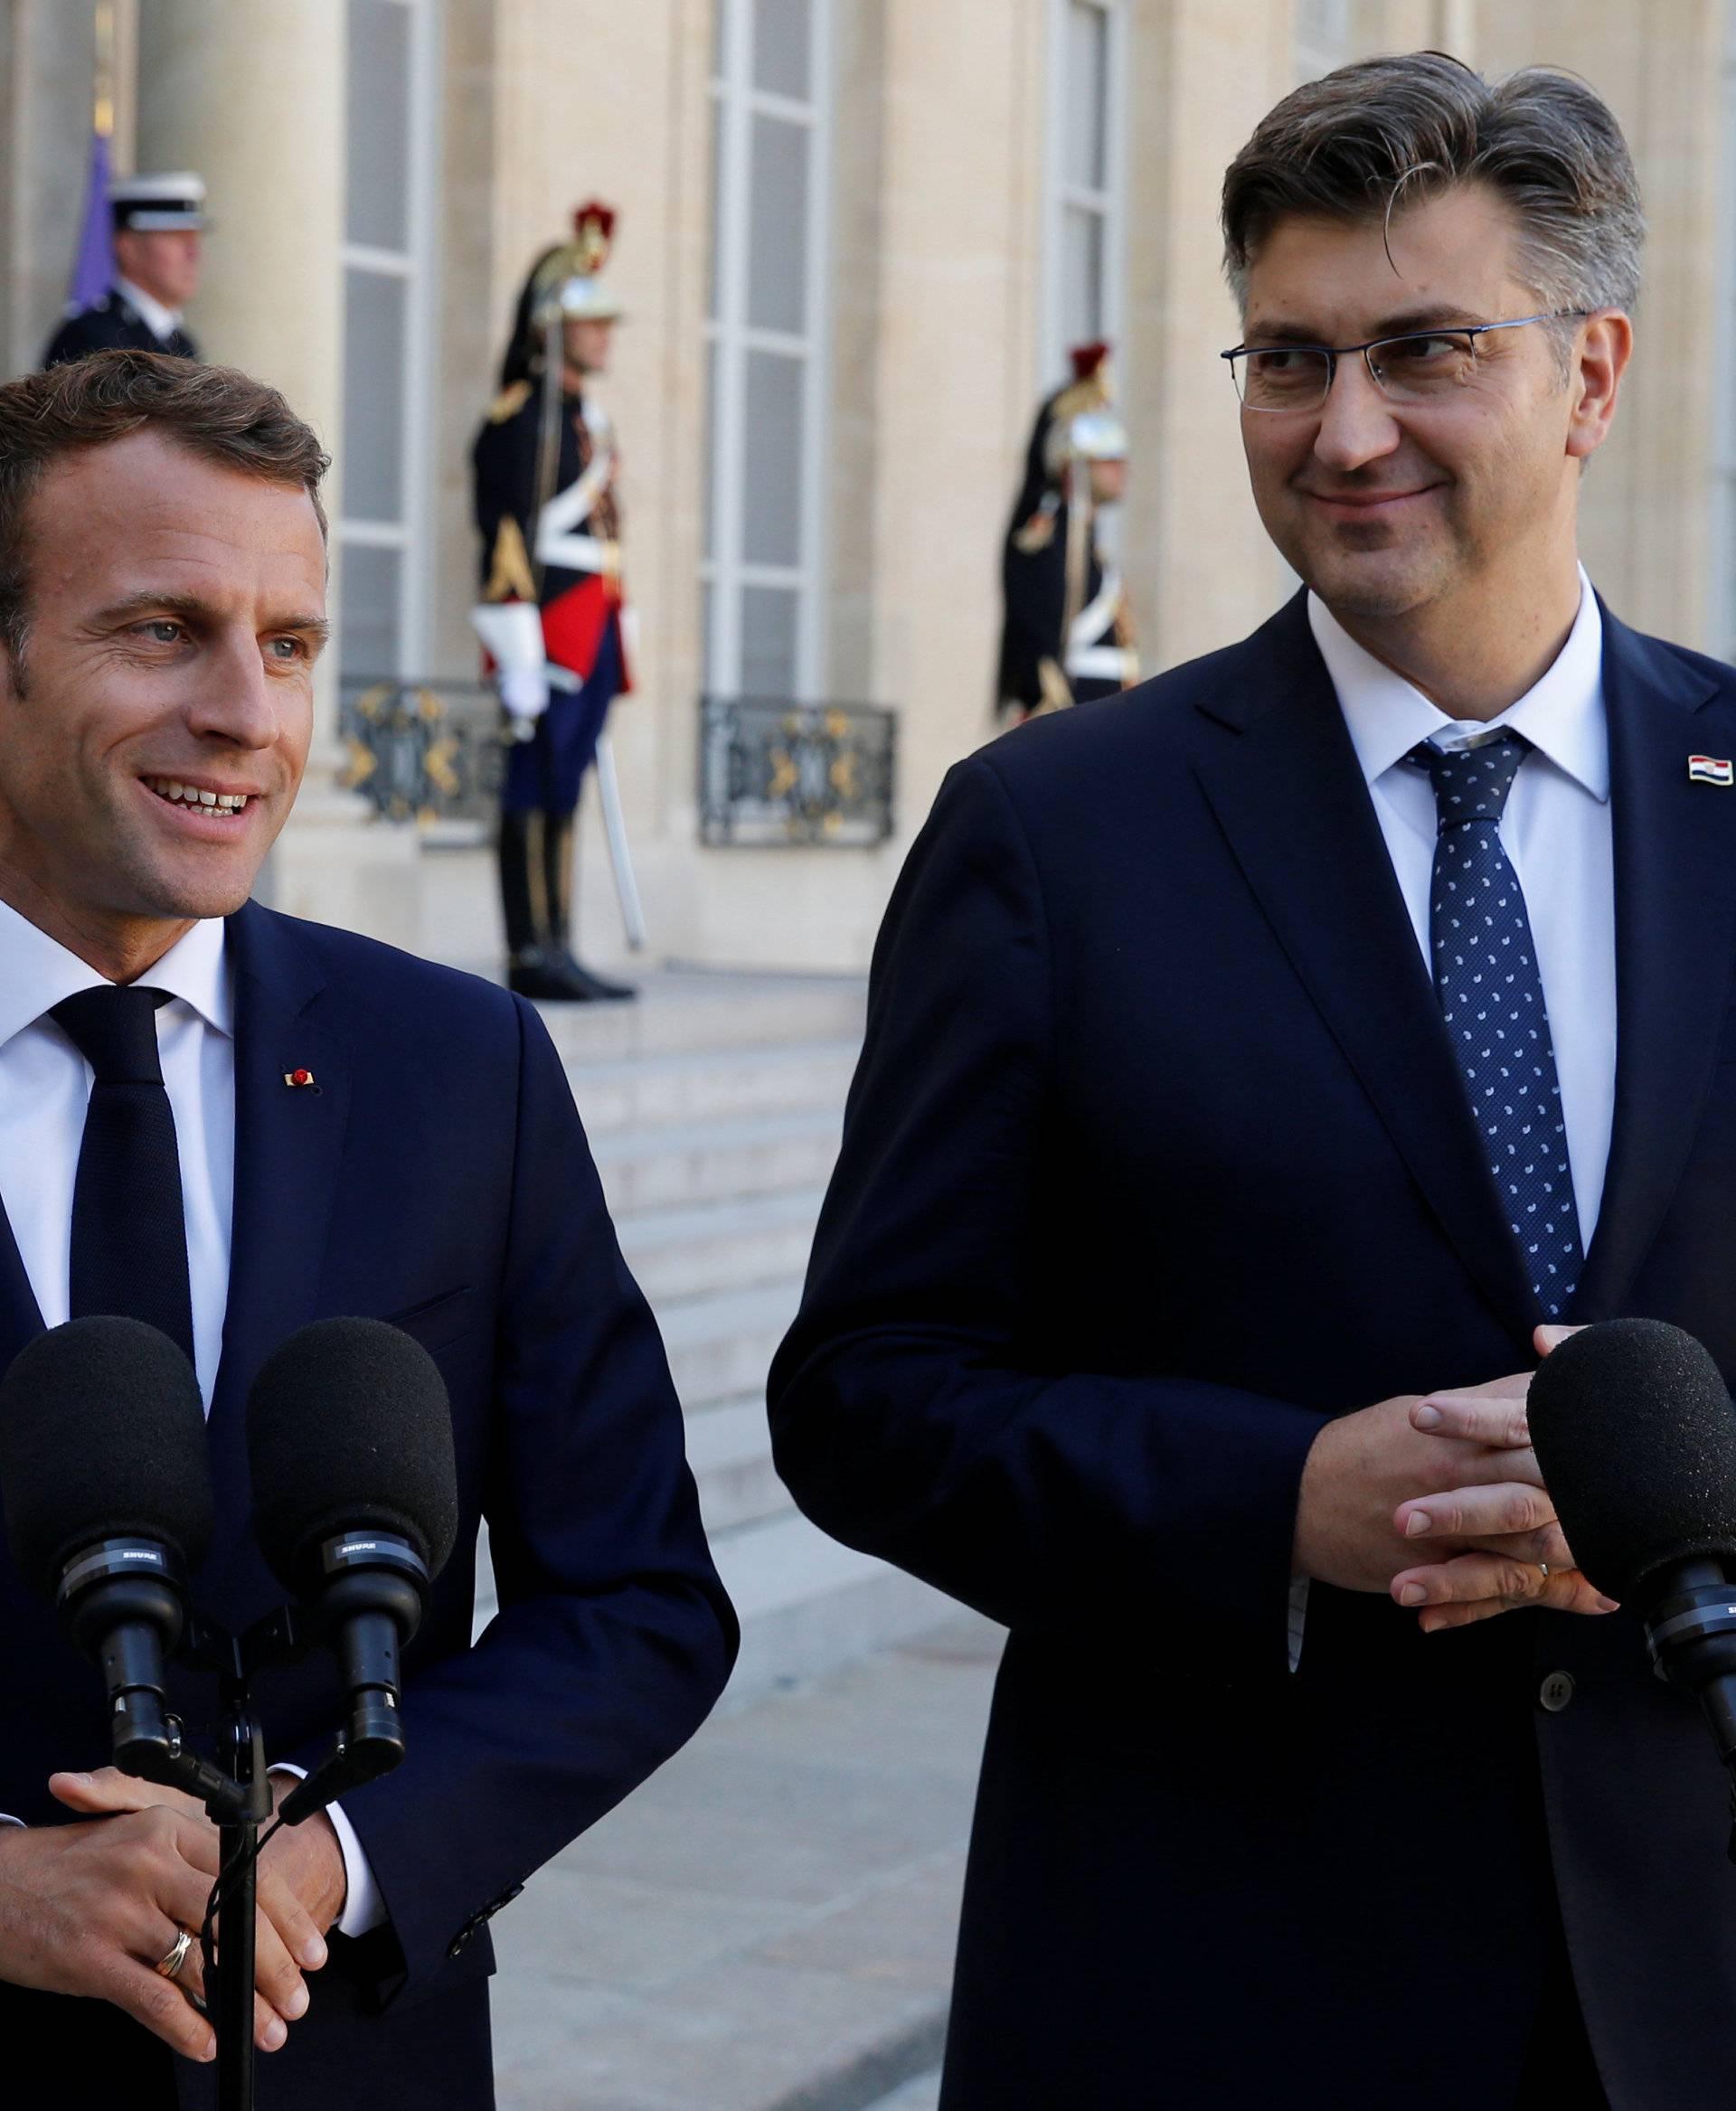 French President Emmanuel Macron and Croatian Prime Minister Andrej Plenkovic make a statement in the courtyard of the Elysee Palace in Paris